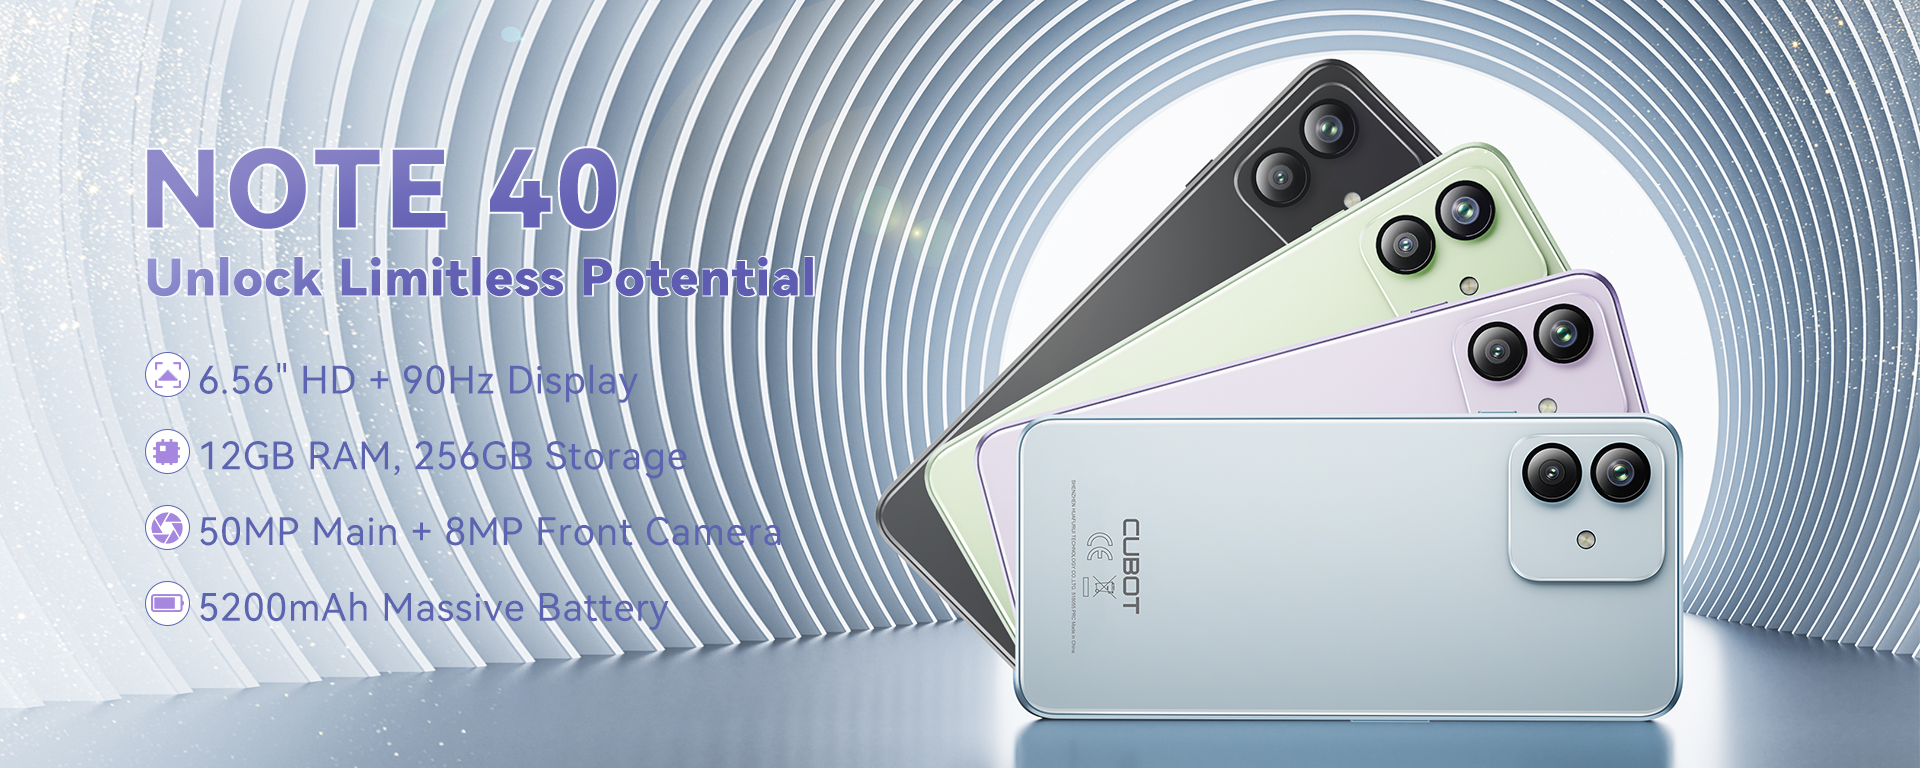 Cubot Note 40 pictures, official photos